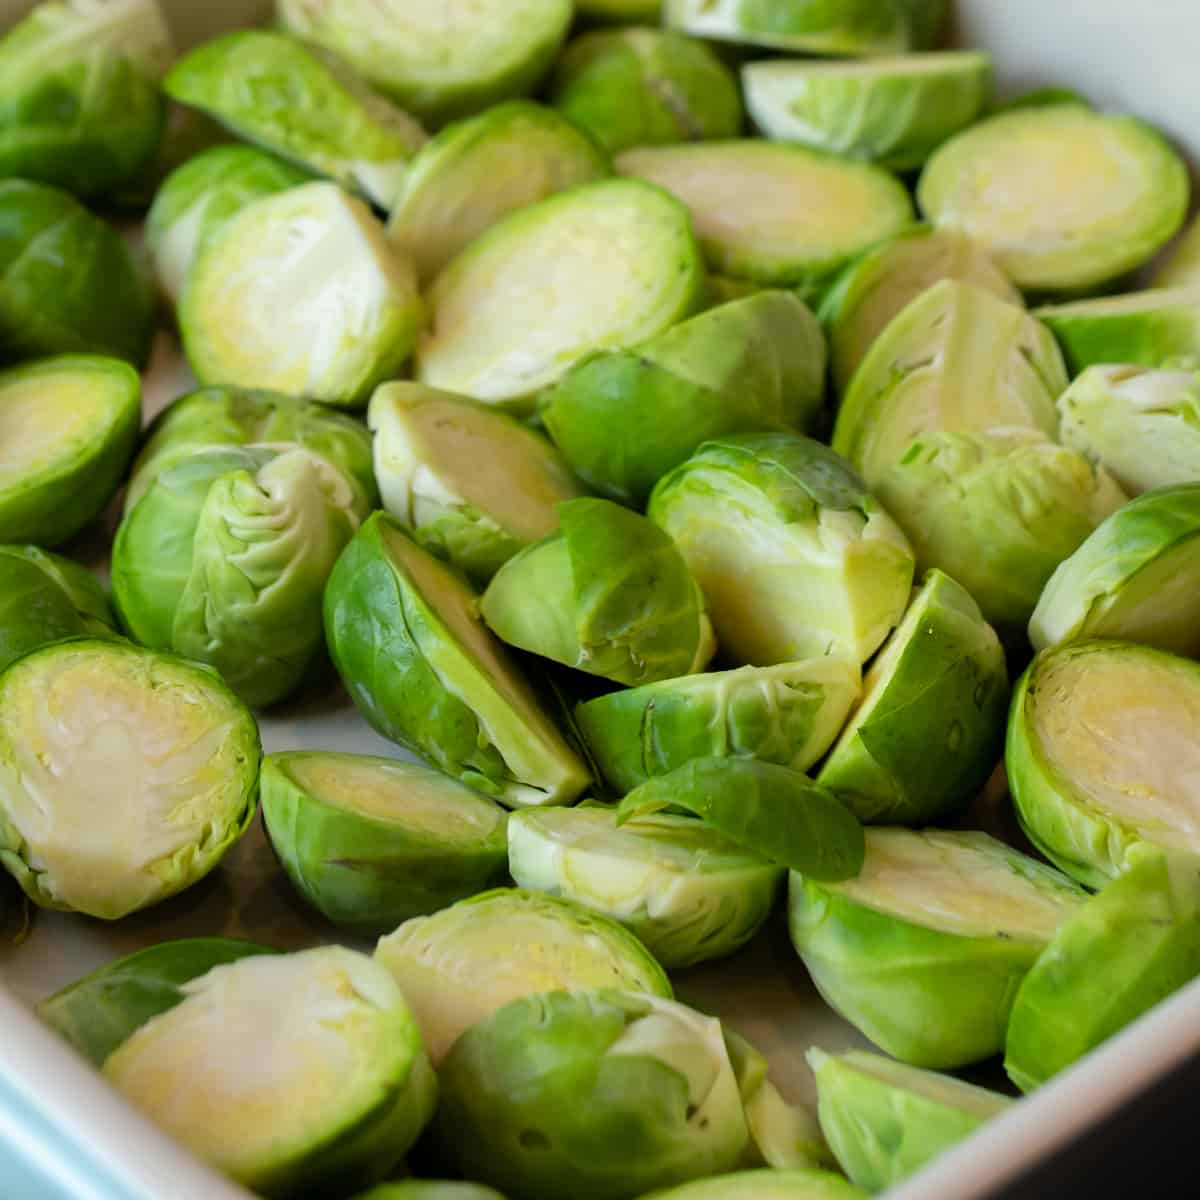 Raw Brussels sprouts cut in half.